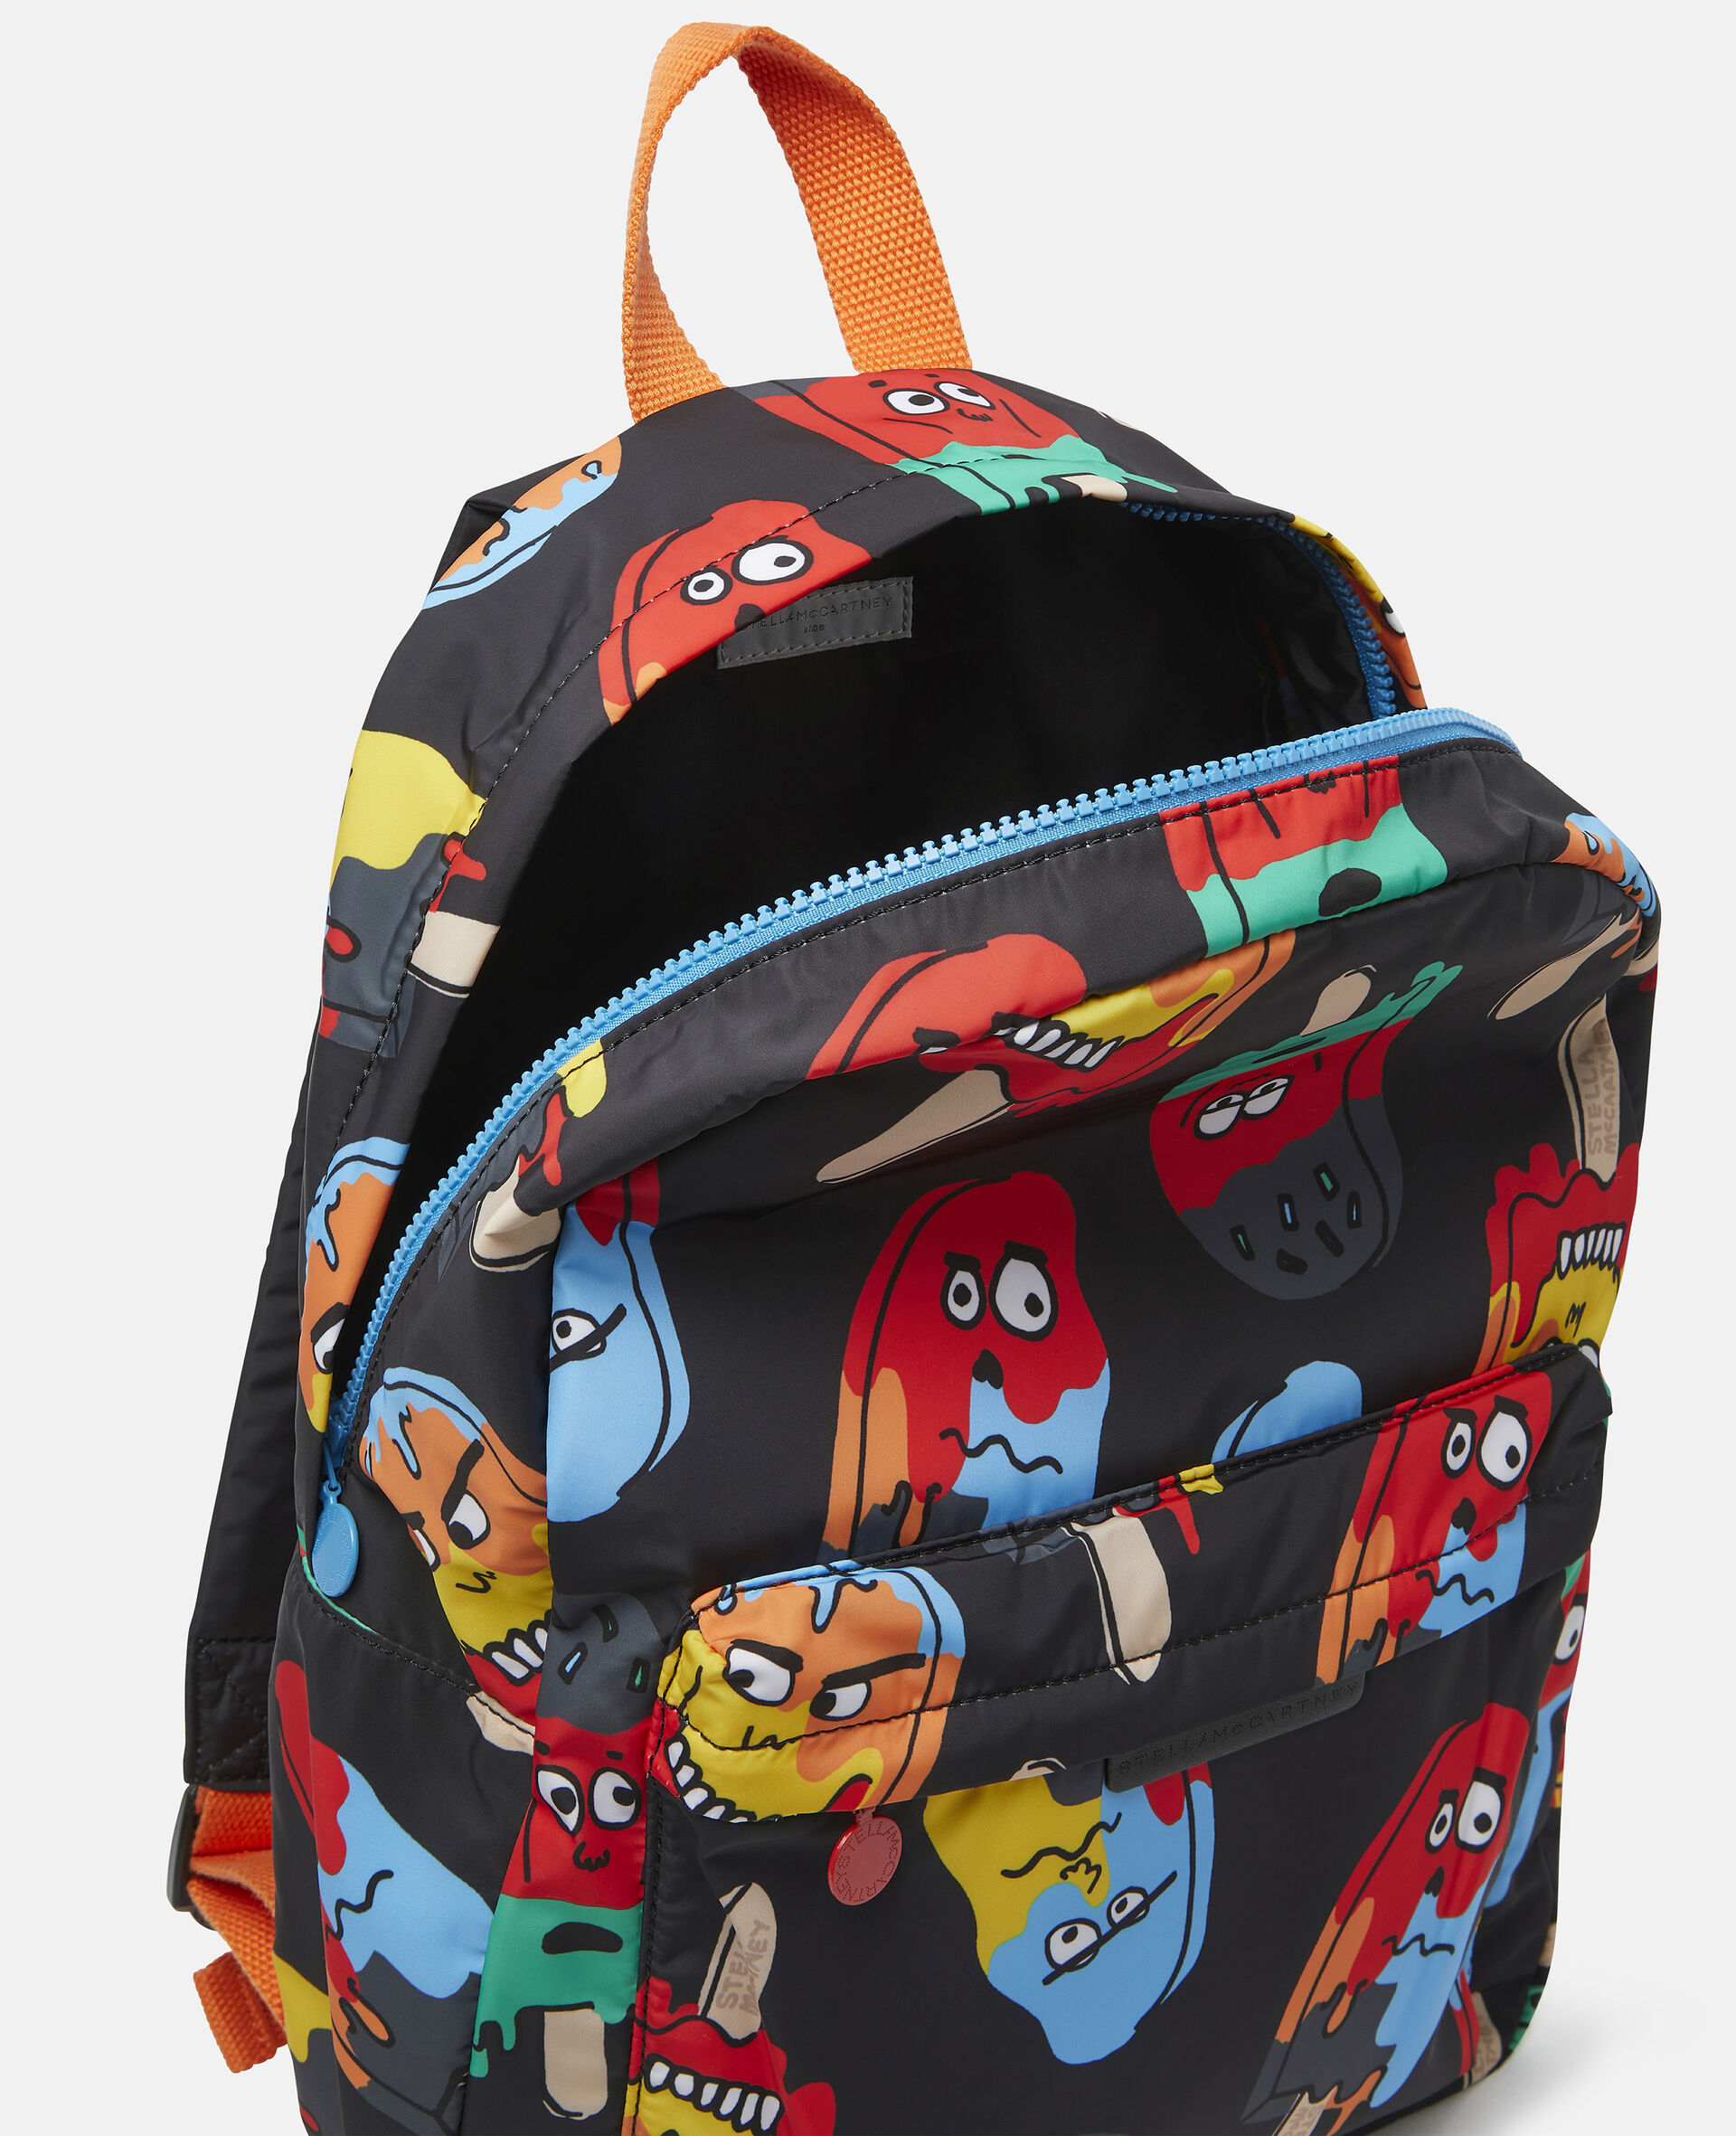 Ice lolly Backpack-Black-large image number 3